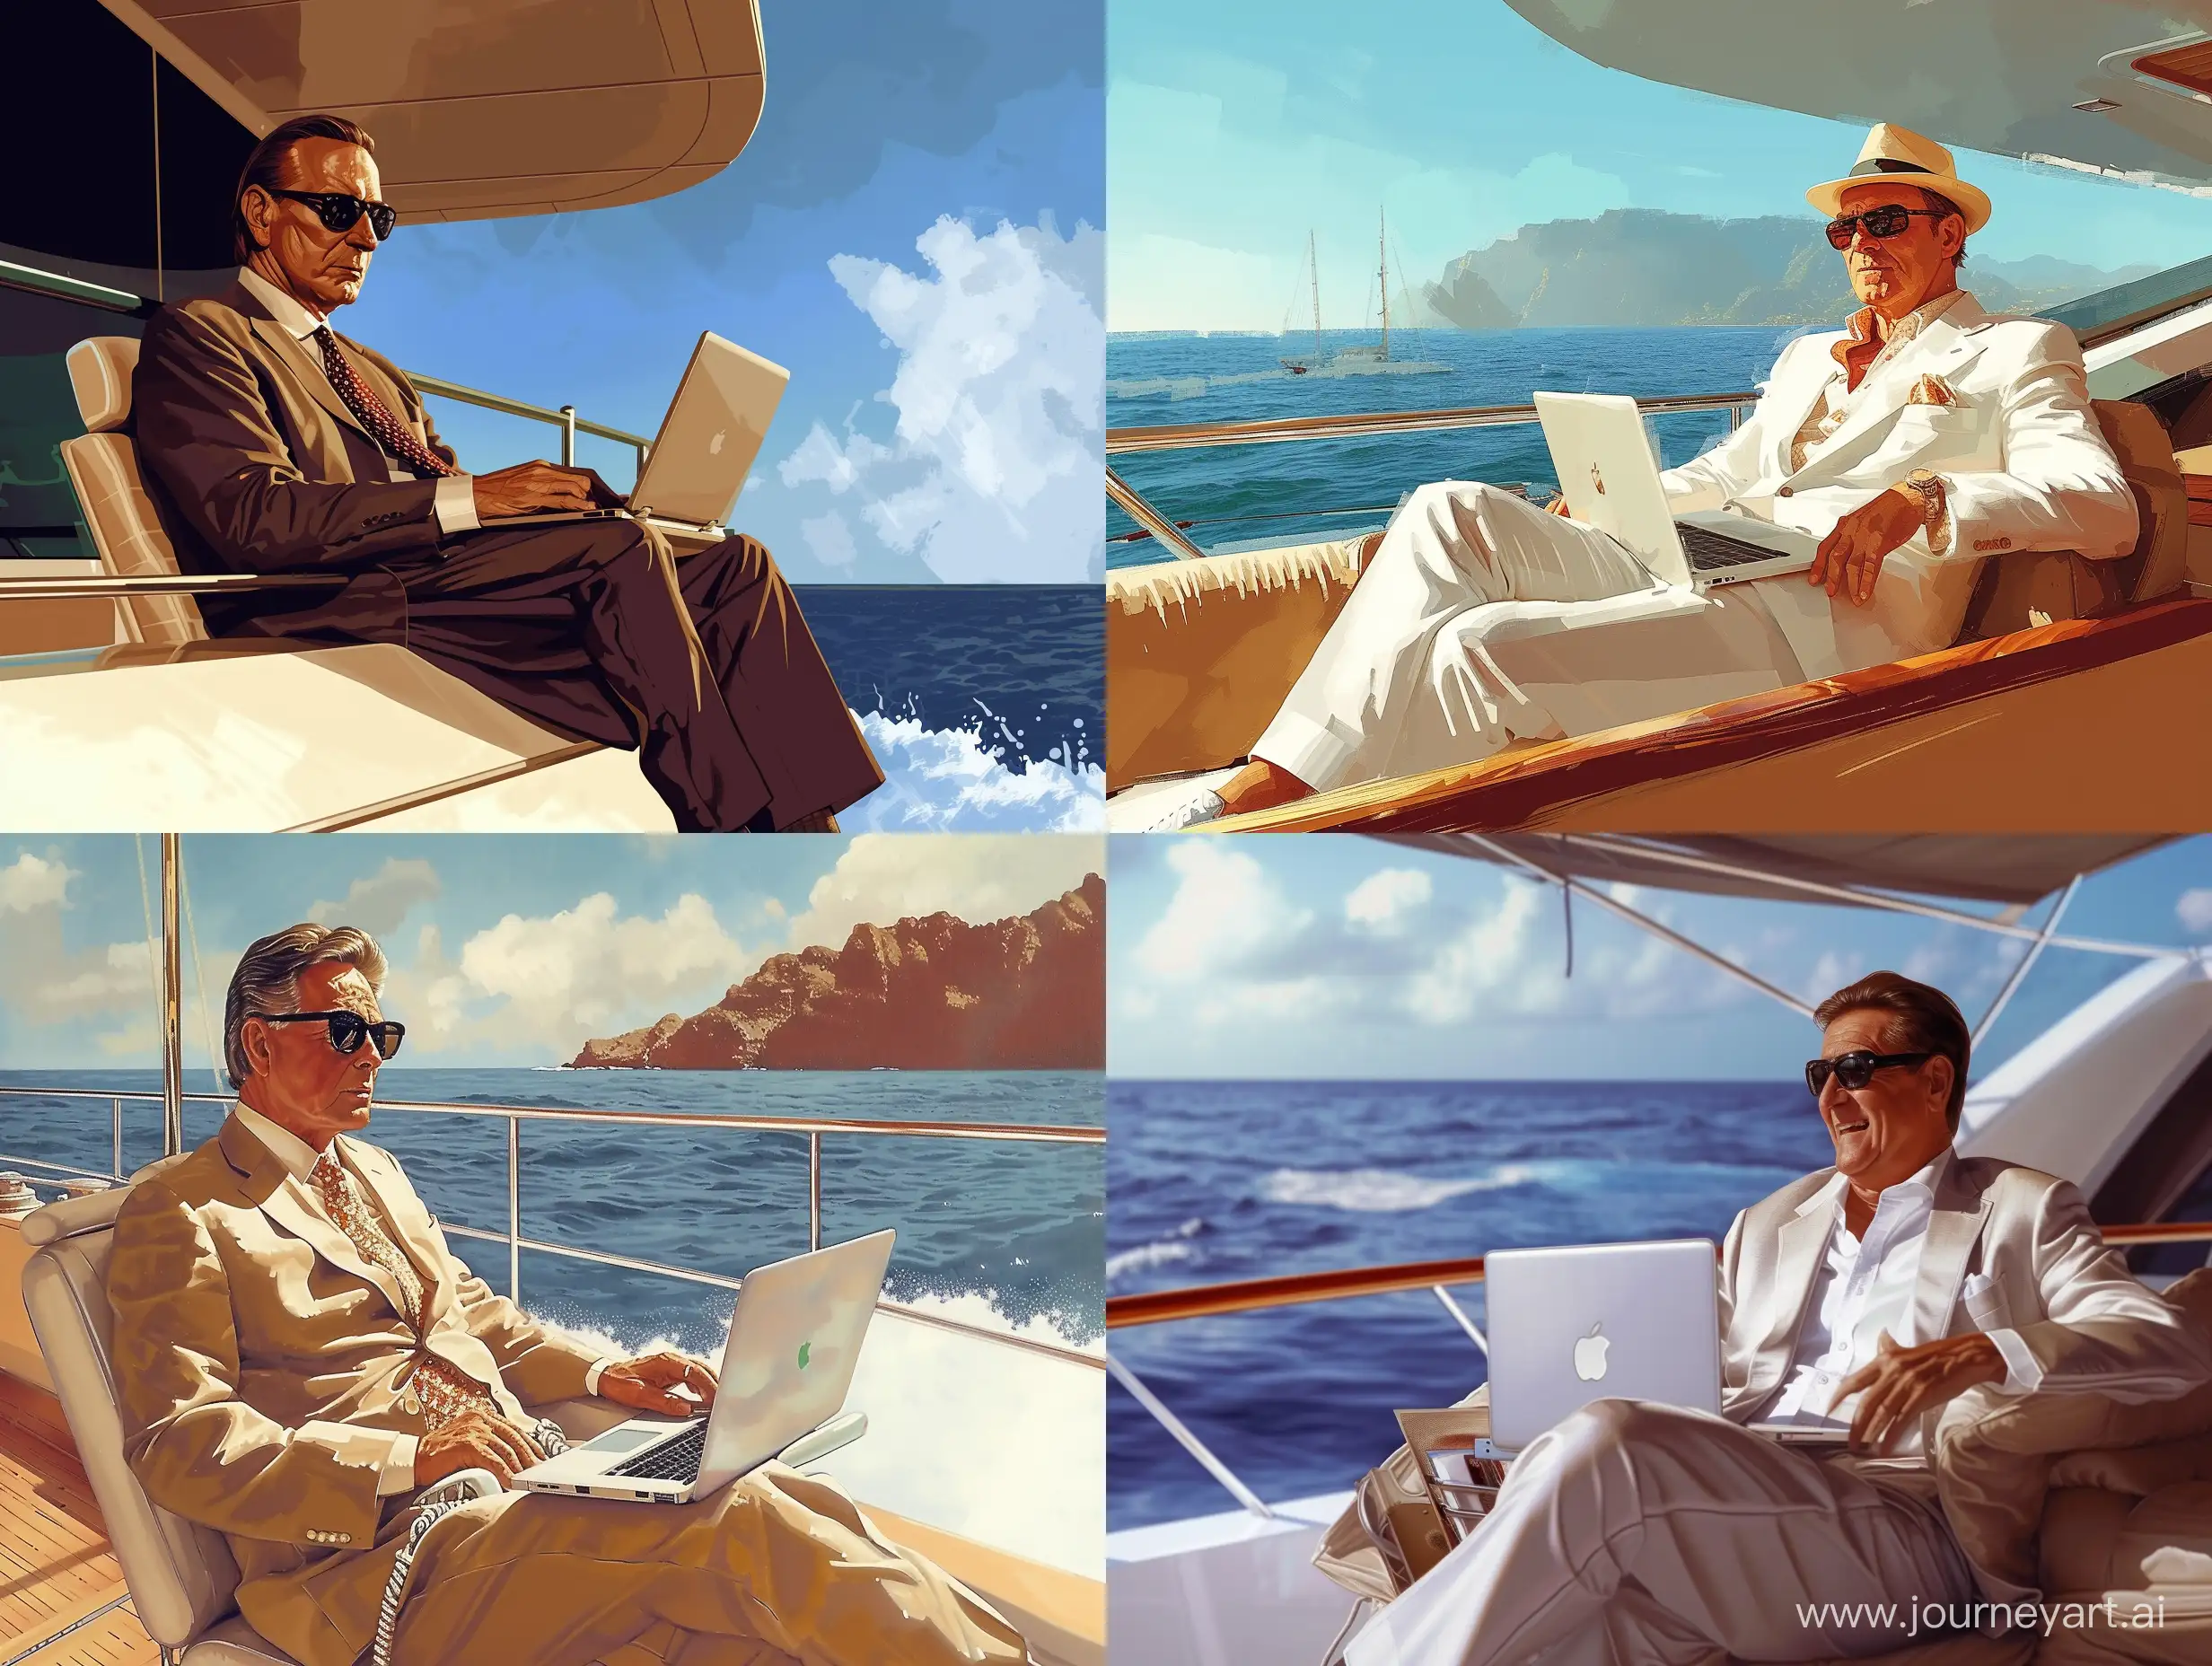 Ray-Kroc-Embracing-Luxury-Yachting-with-Laptop-in-Alla-Prima-Art-Style